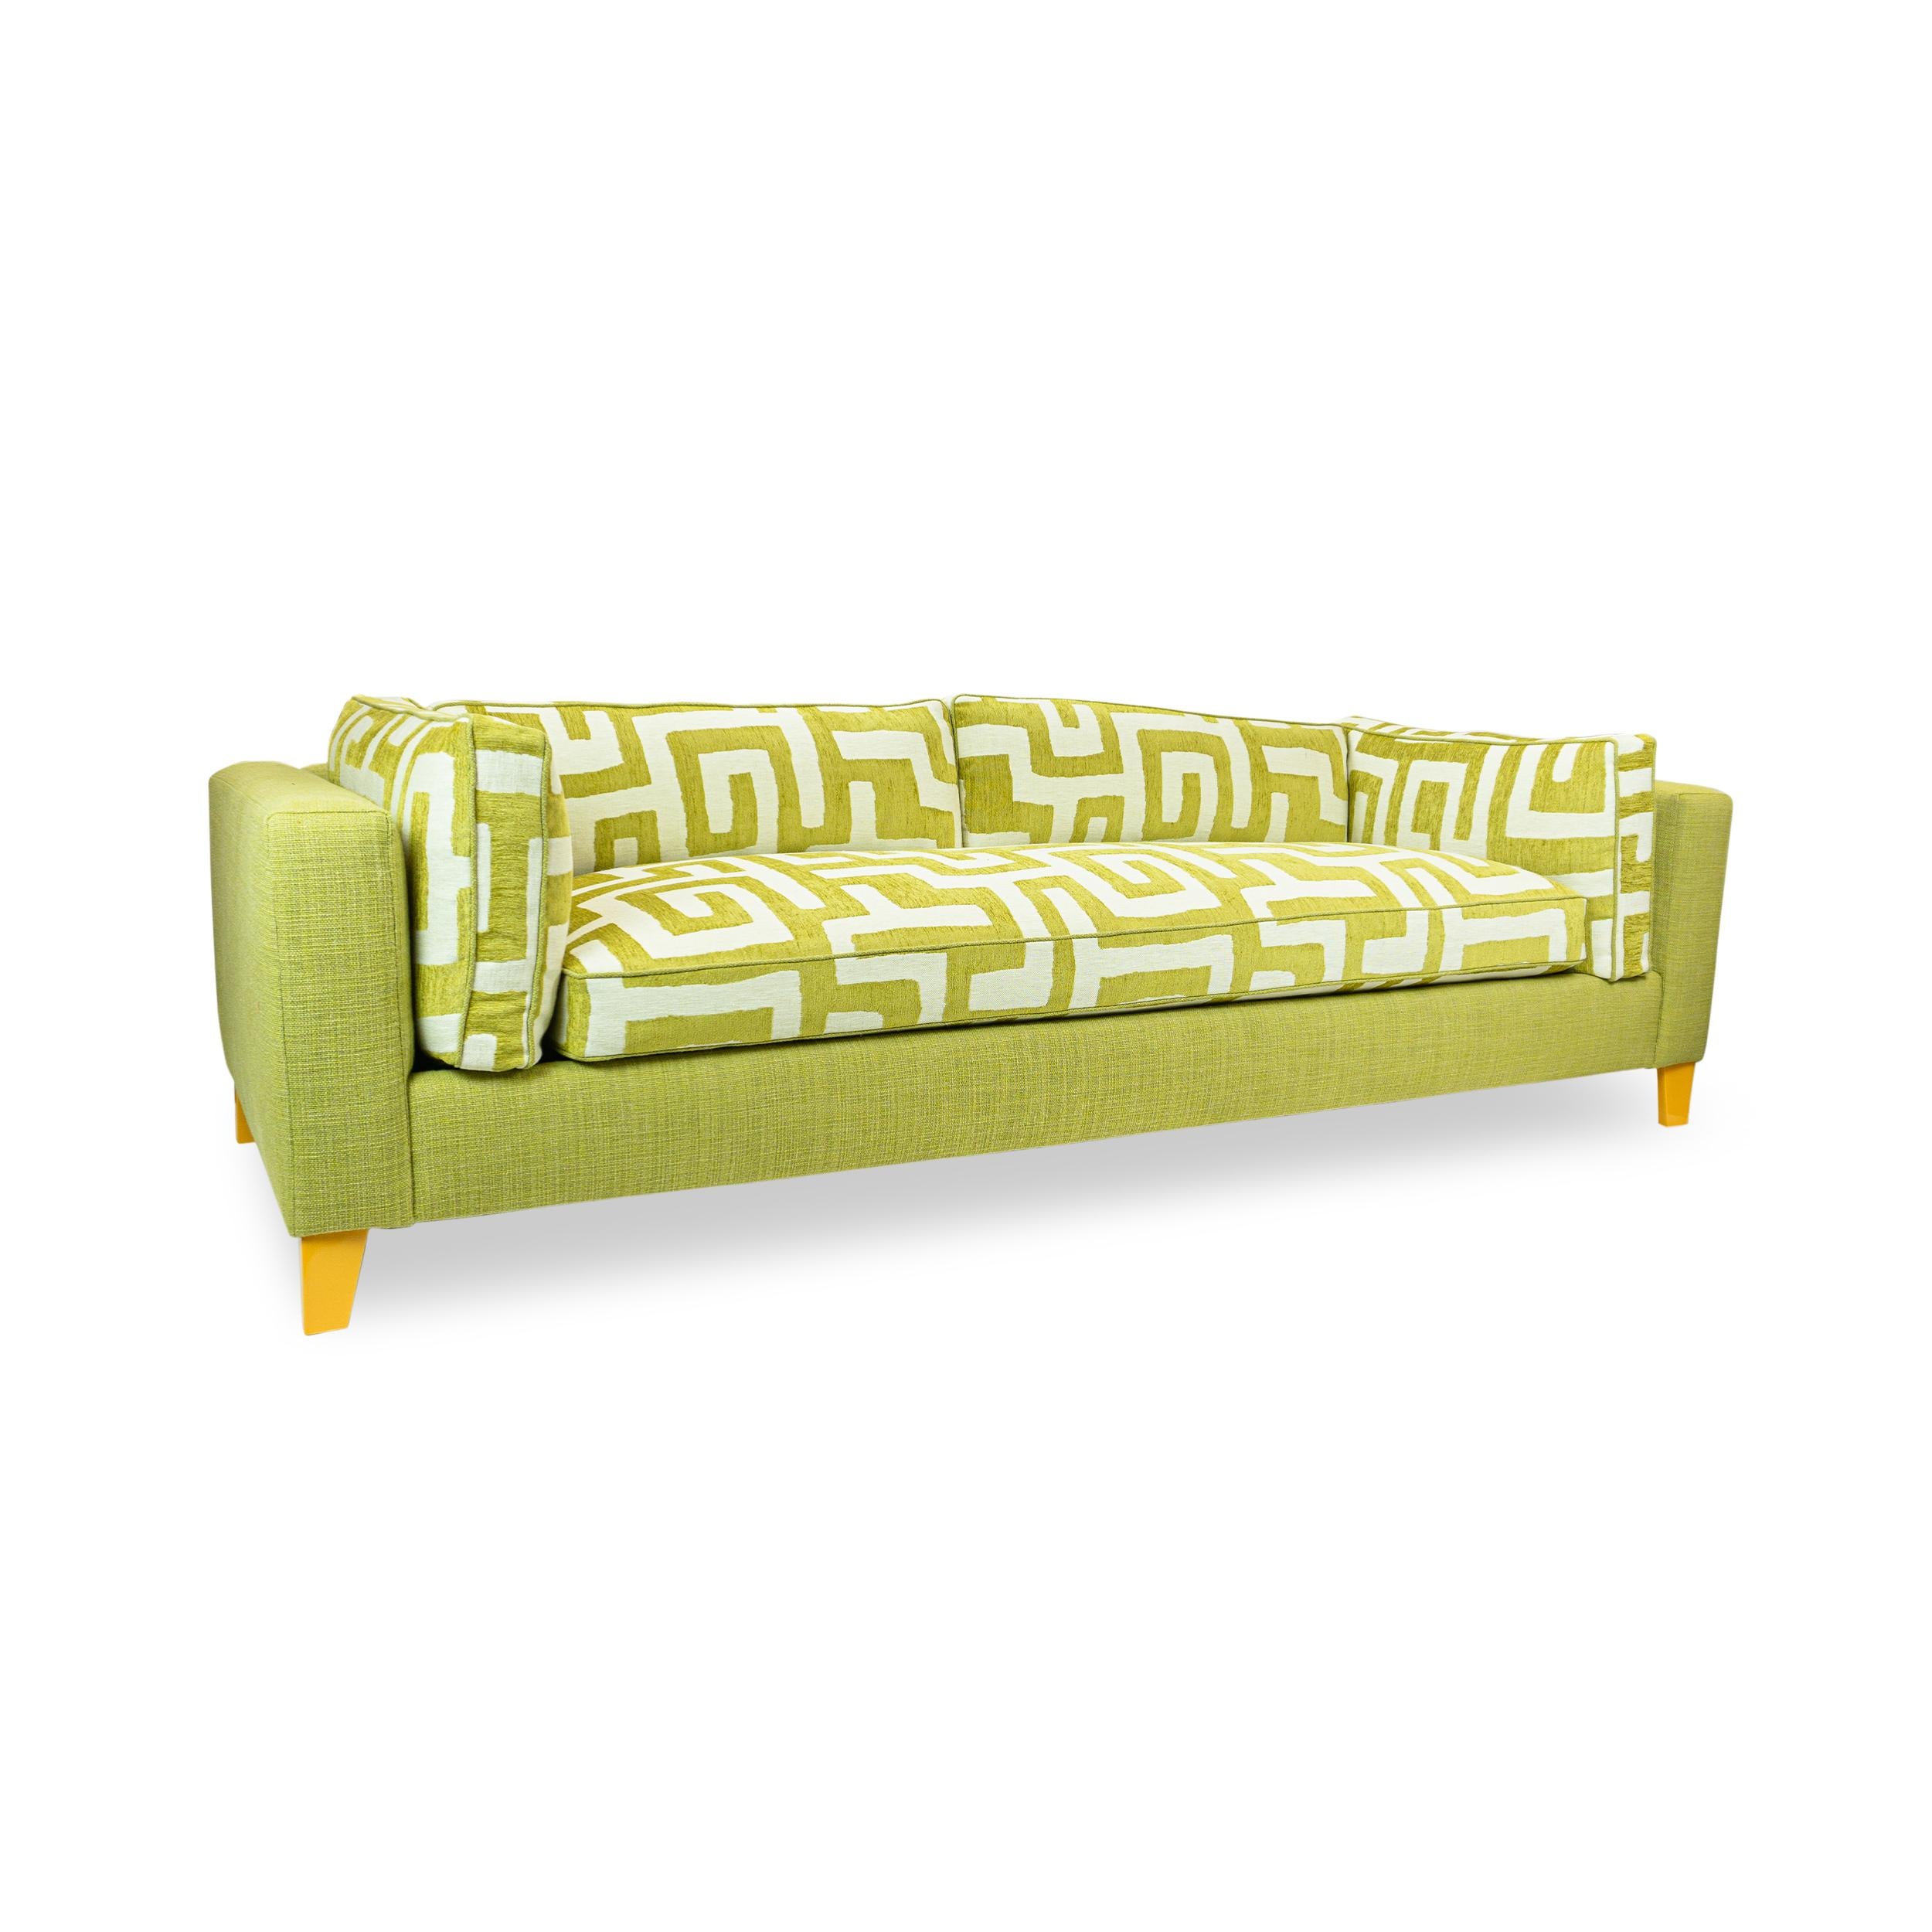 Mid-Century Modern Lime Green Bench Cushion Sofa with Maze Pattern Cushions and Sunflower Feet For Sale